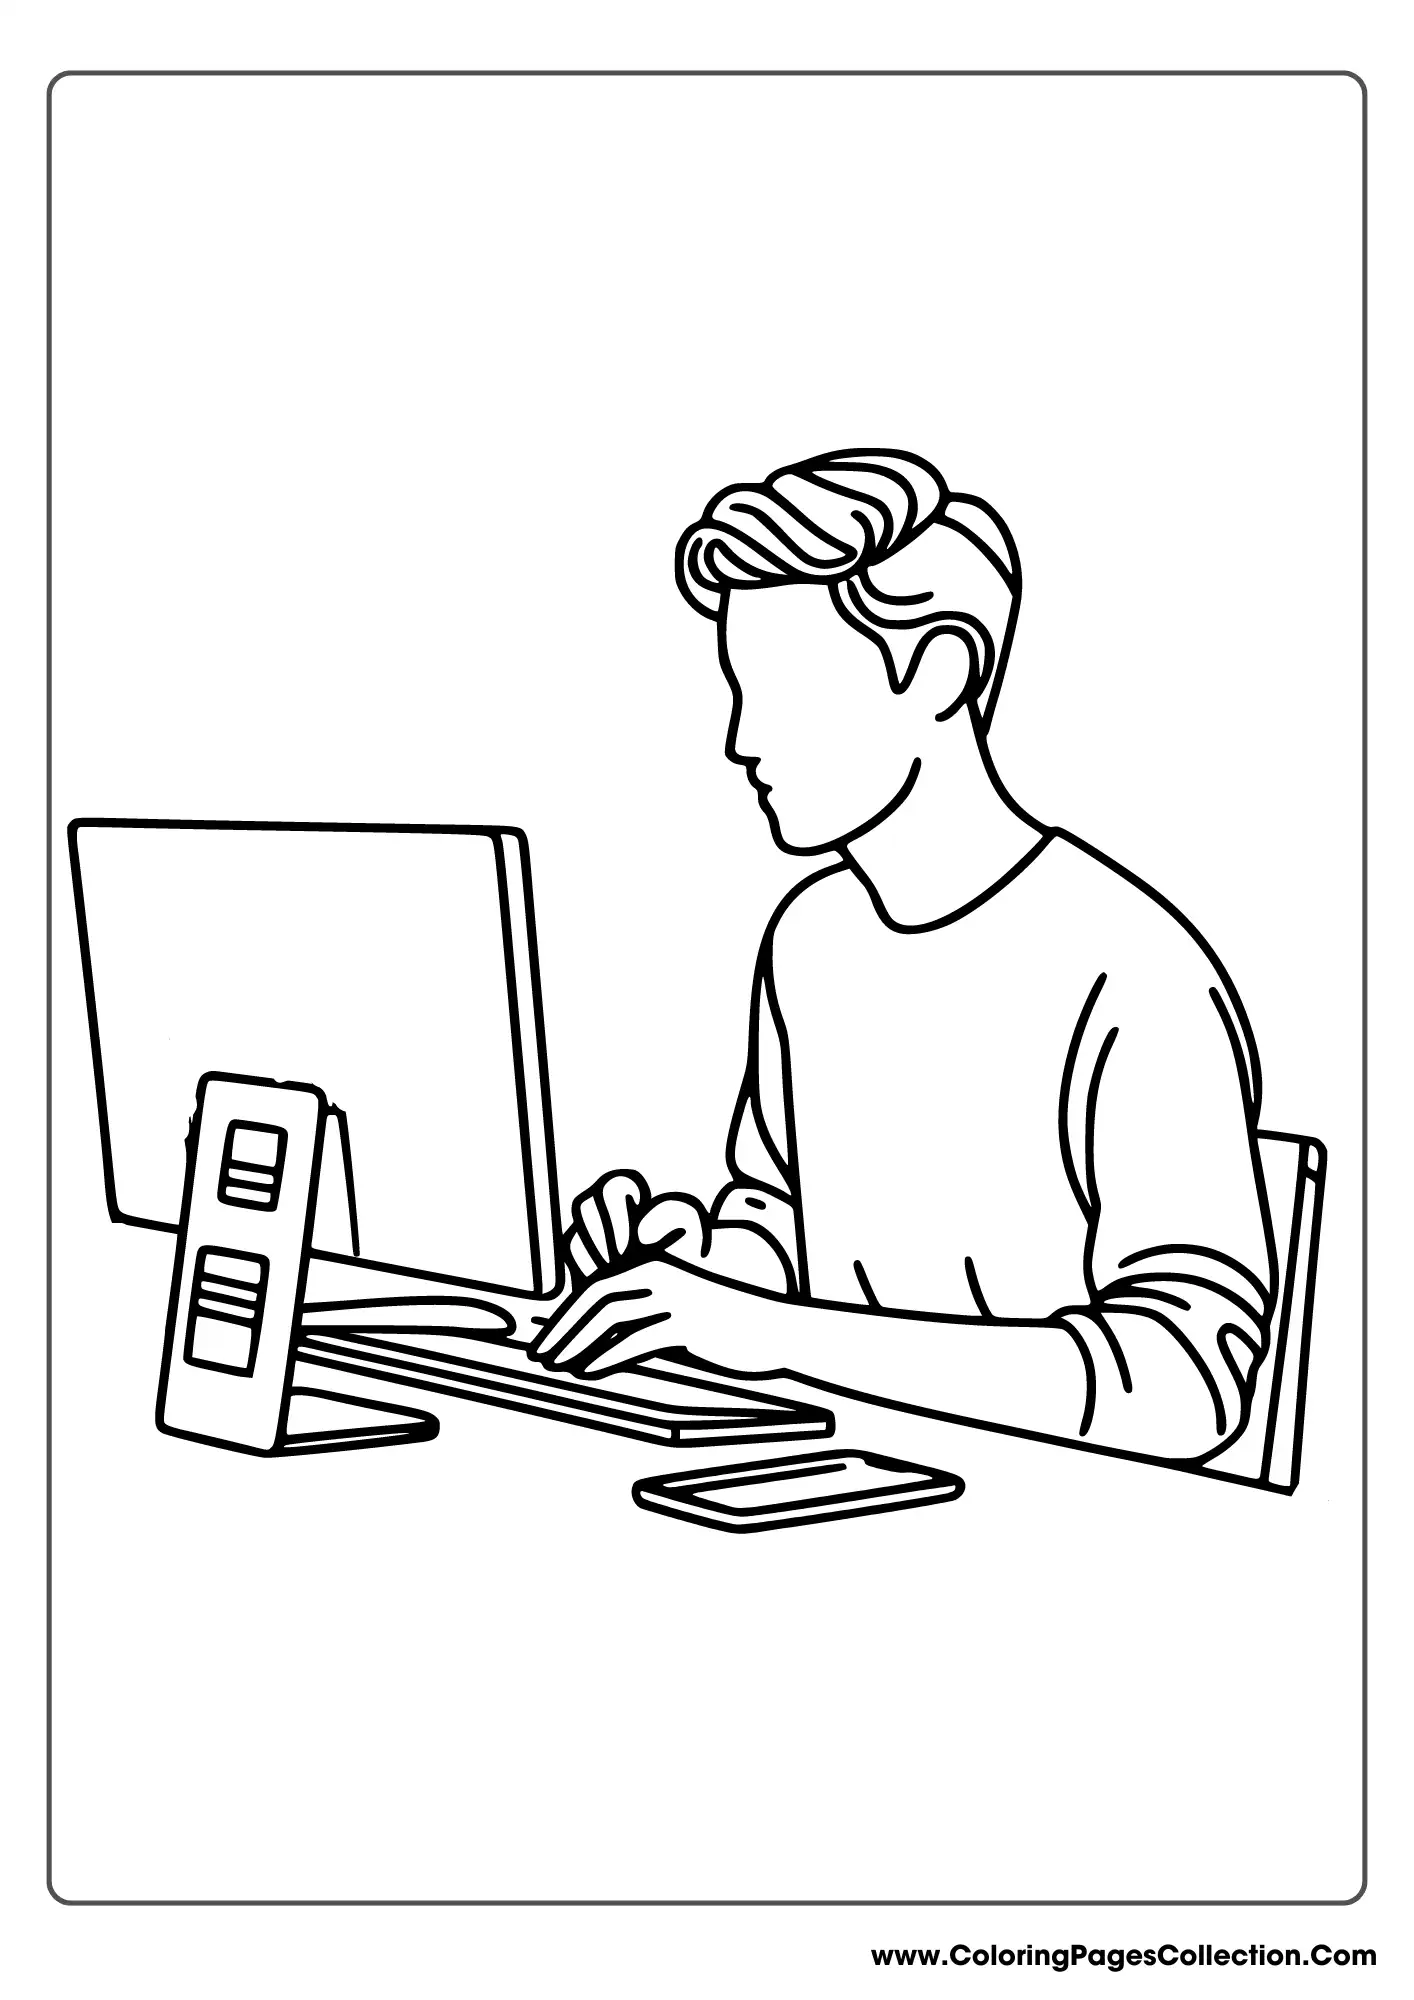 Man Working On Computer, Computer coloring pages